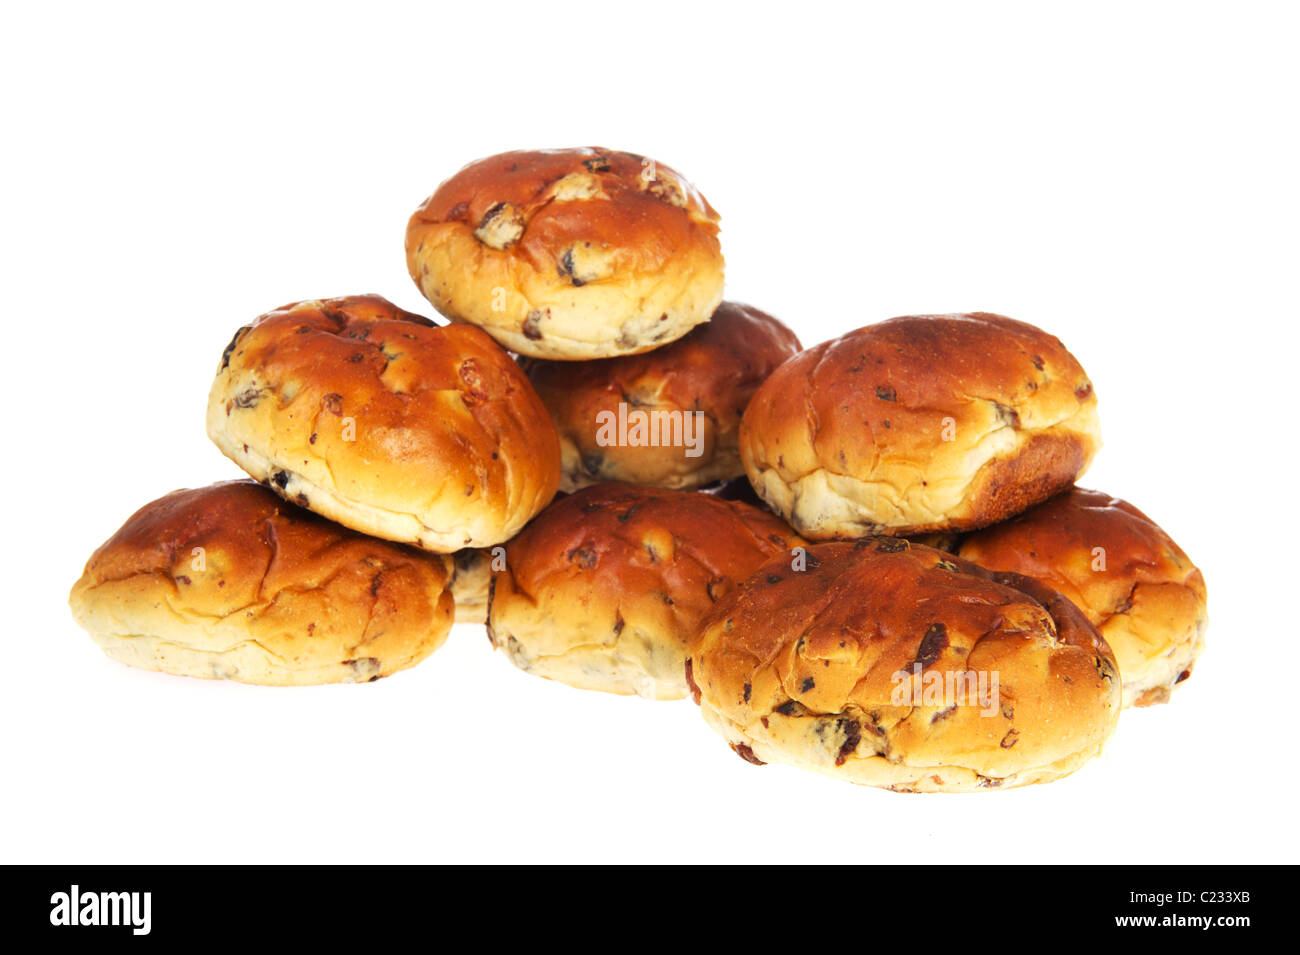 Many bread bun rolls with raisins and currants isolated over white Stock Photo